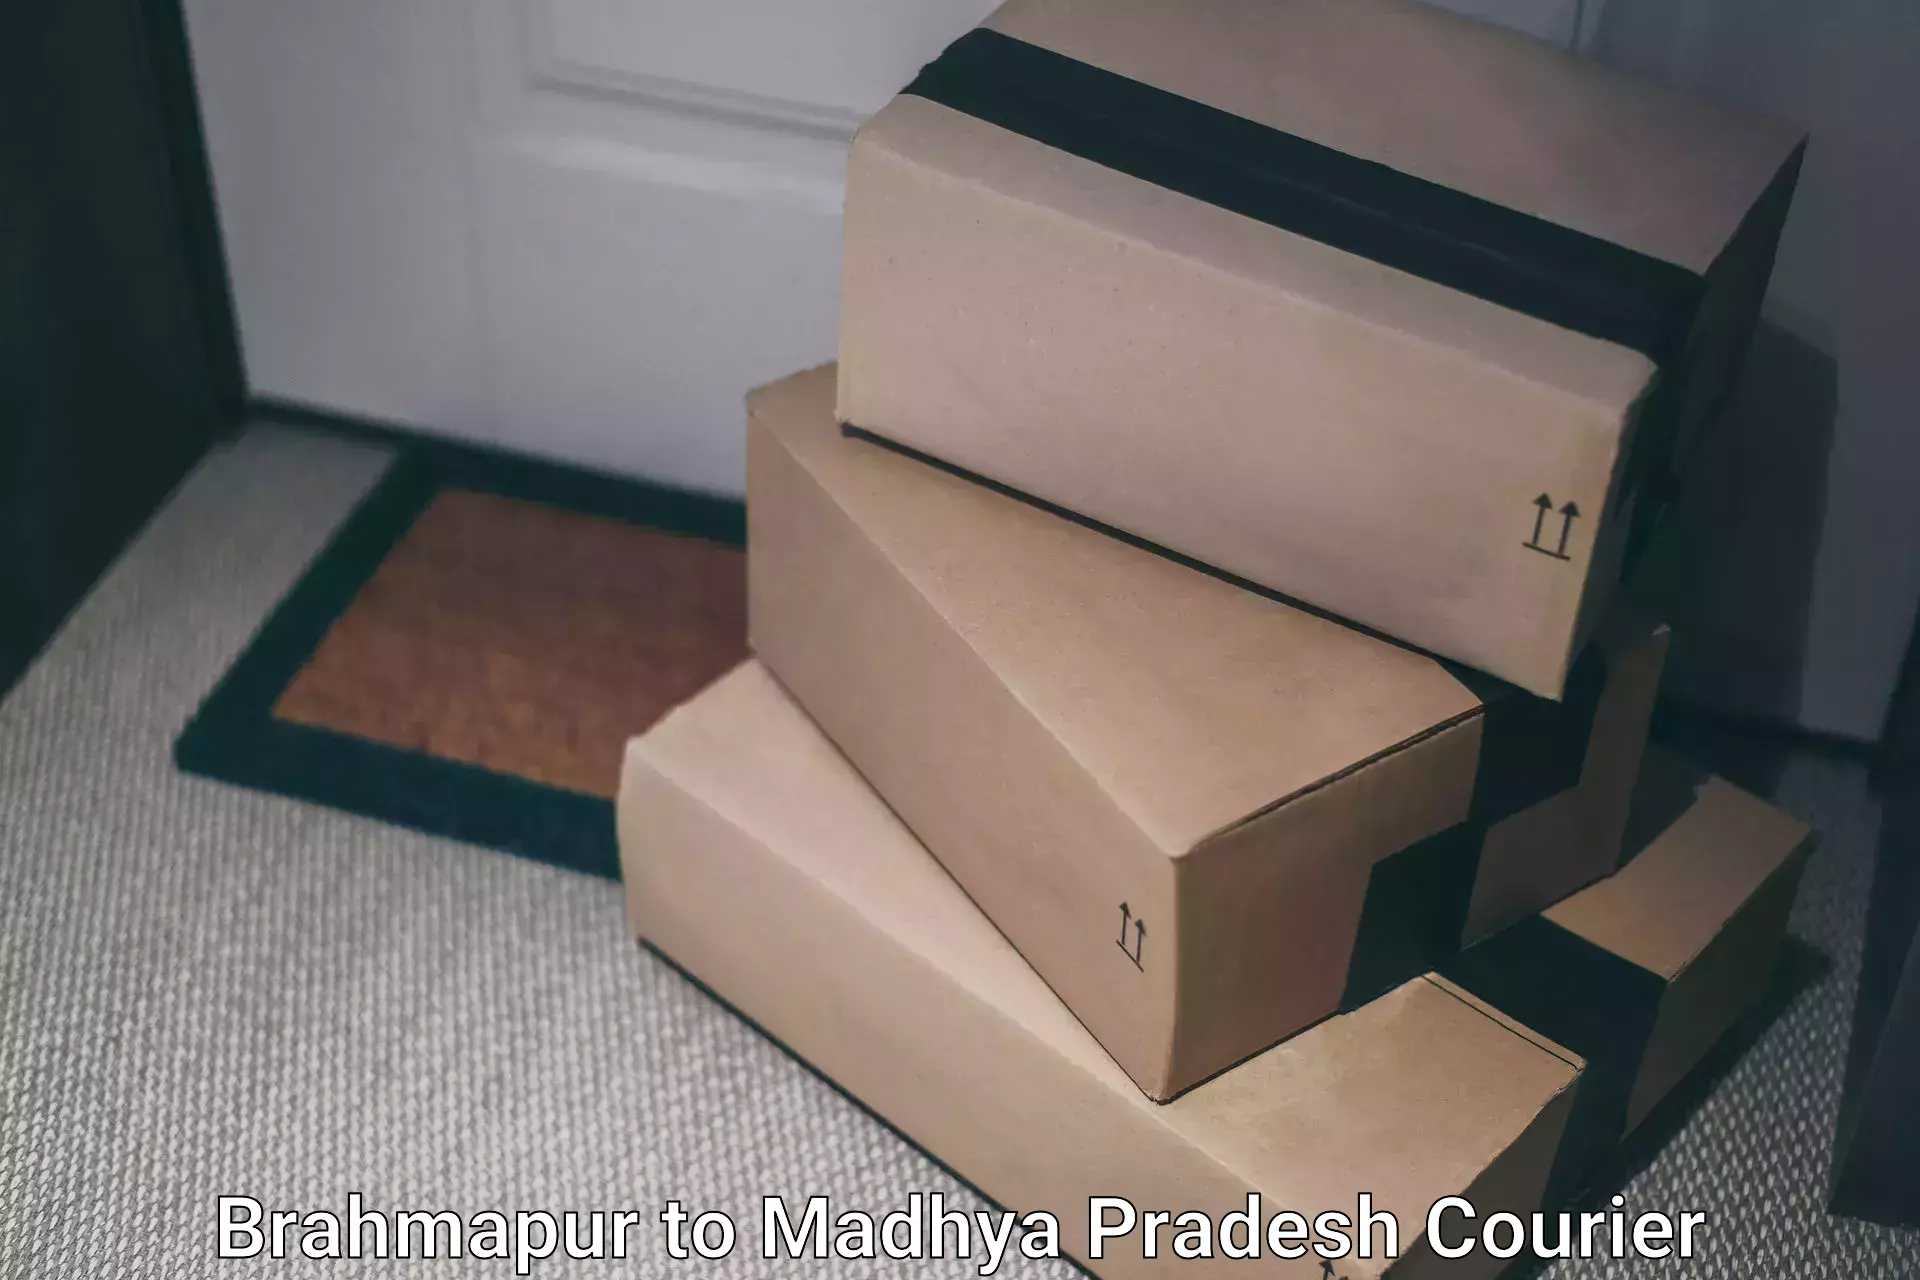 State-of-the-art courier technology Brahmapur to Karera